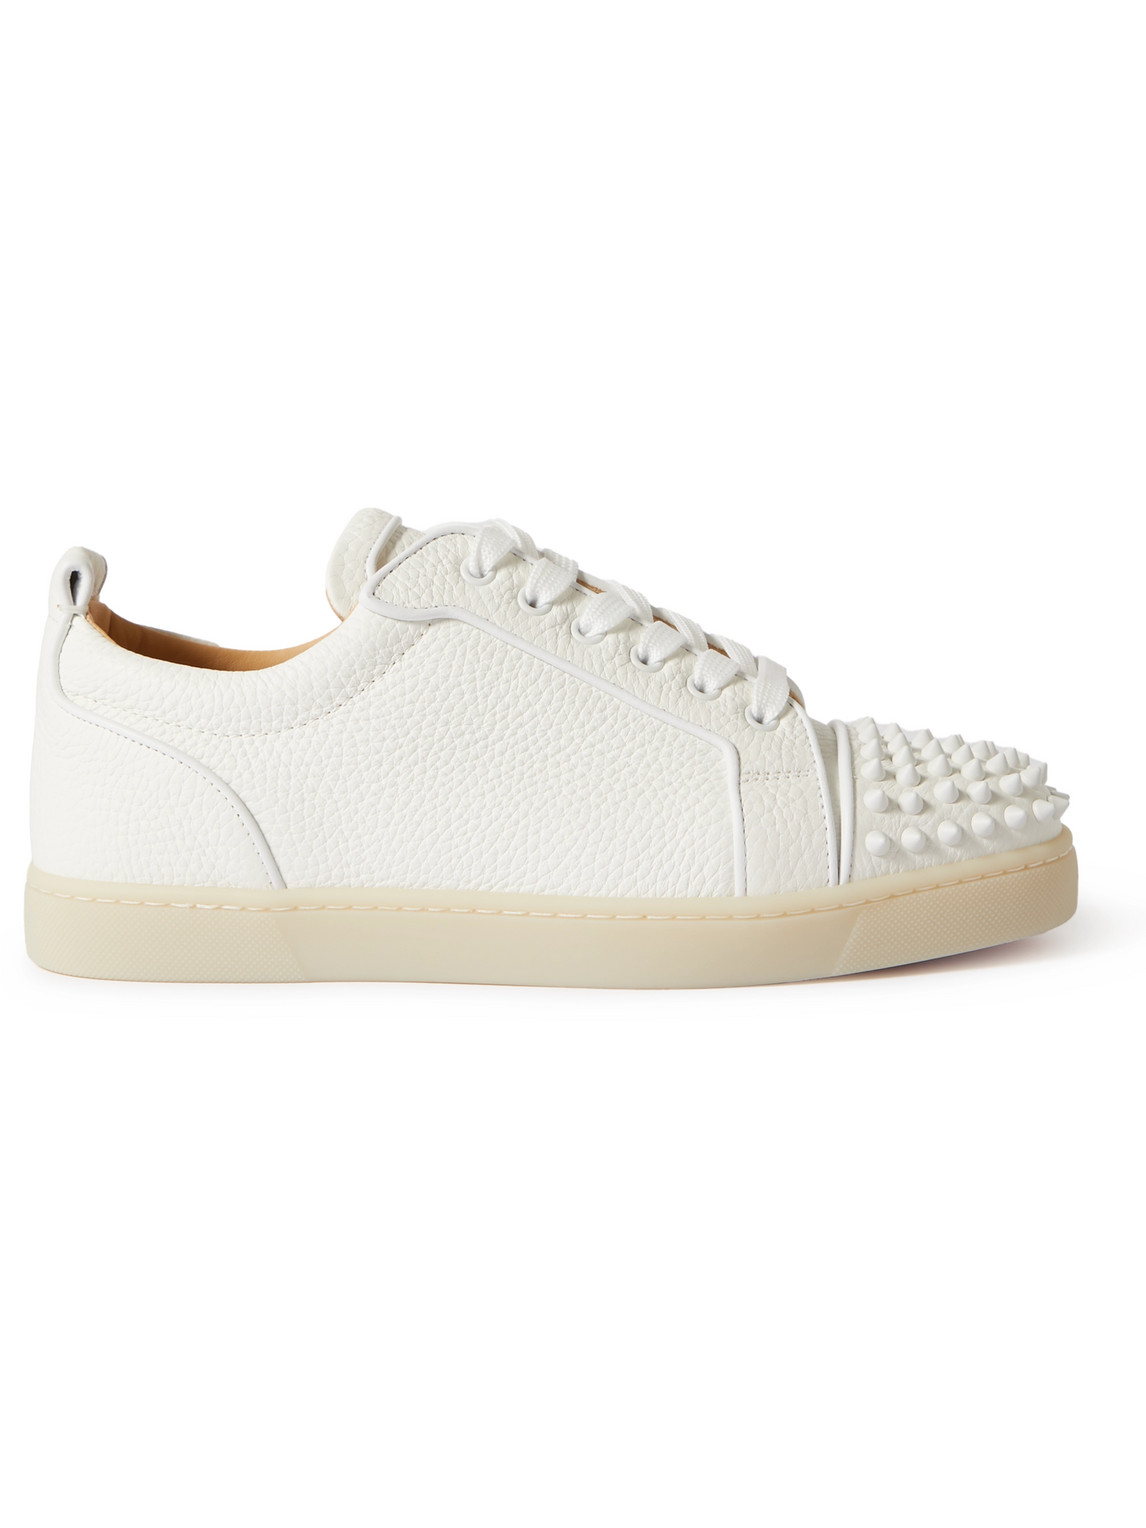 Christian Louboutin Louis Junior Spikes Cap-toe Full-grain Leather Trainers In White